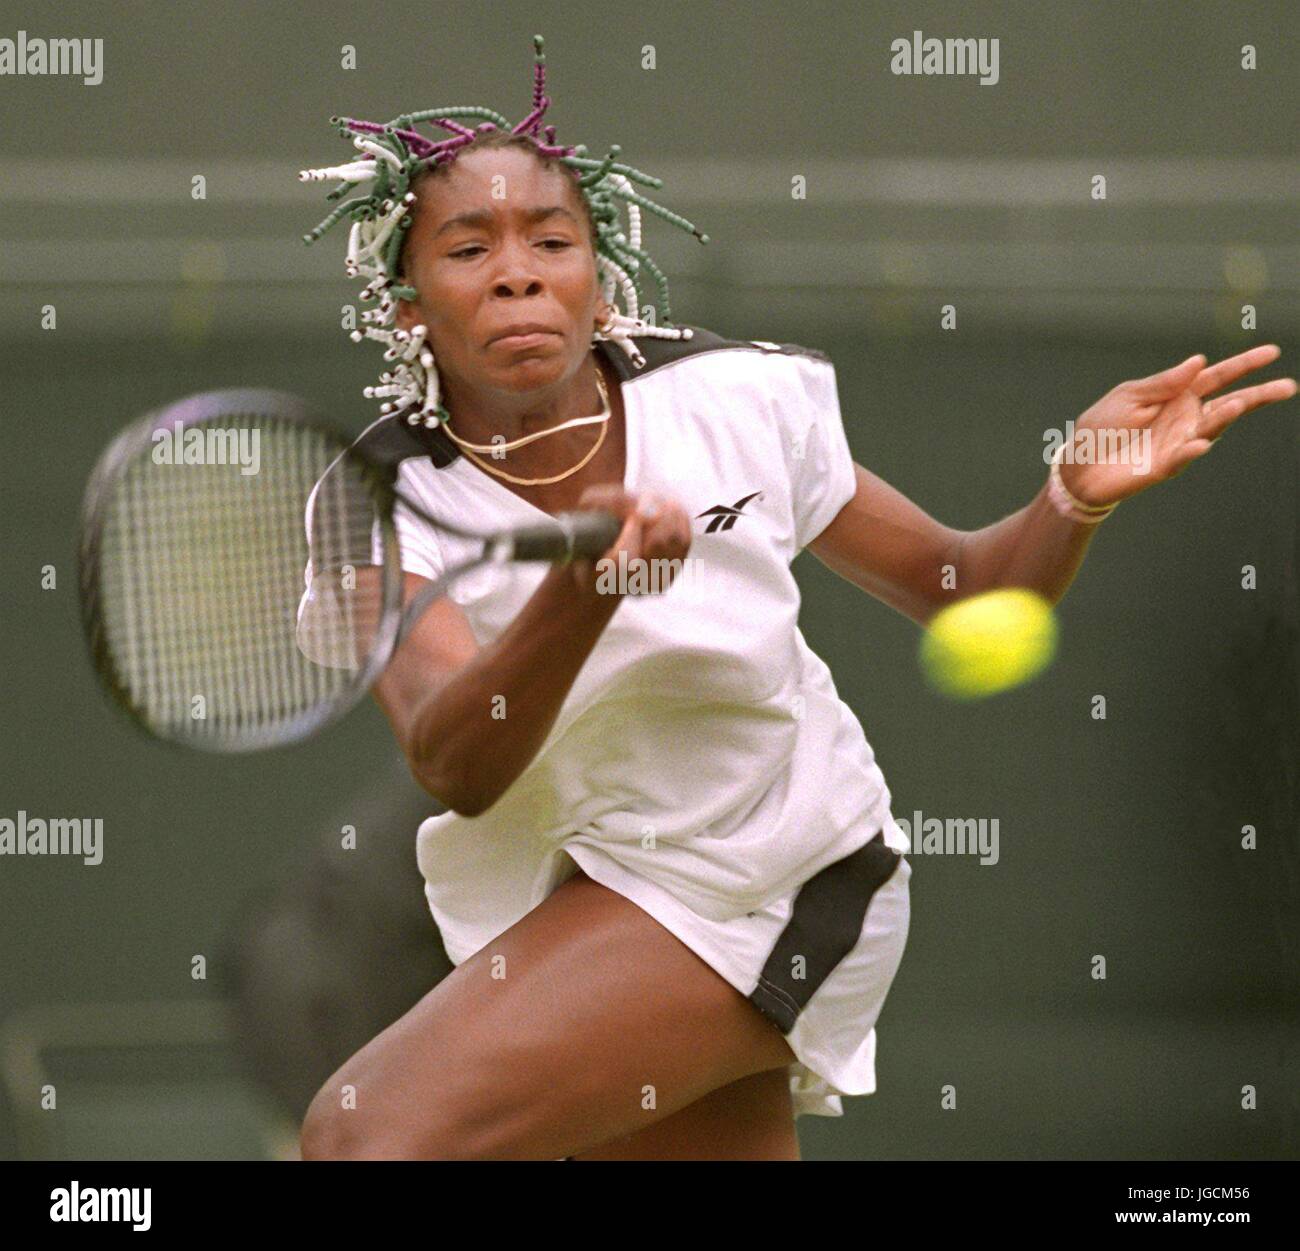 FILE - US-American tennis player Venus Williams in action during her first round match against Grzybowska from Poland in Wimbledon, England, 28 June 1997. In 1997, Venus Williams had her first match in Wimbledon in the South West of England's capital London. She lost during the first round against Grzybowska from Poland. Photo: Frank Leonhardt/dpa Stock Photo